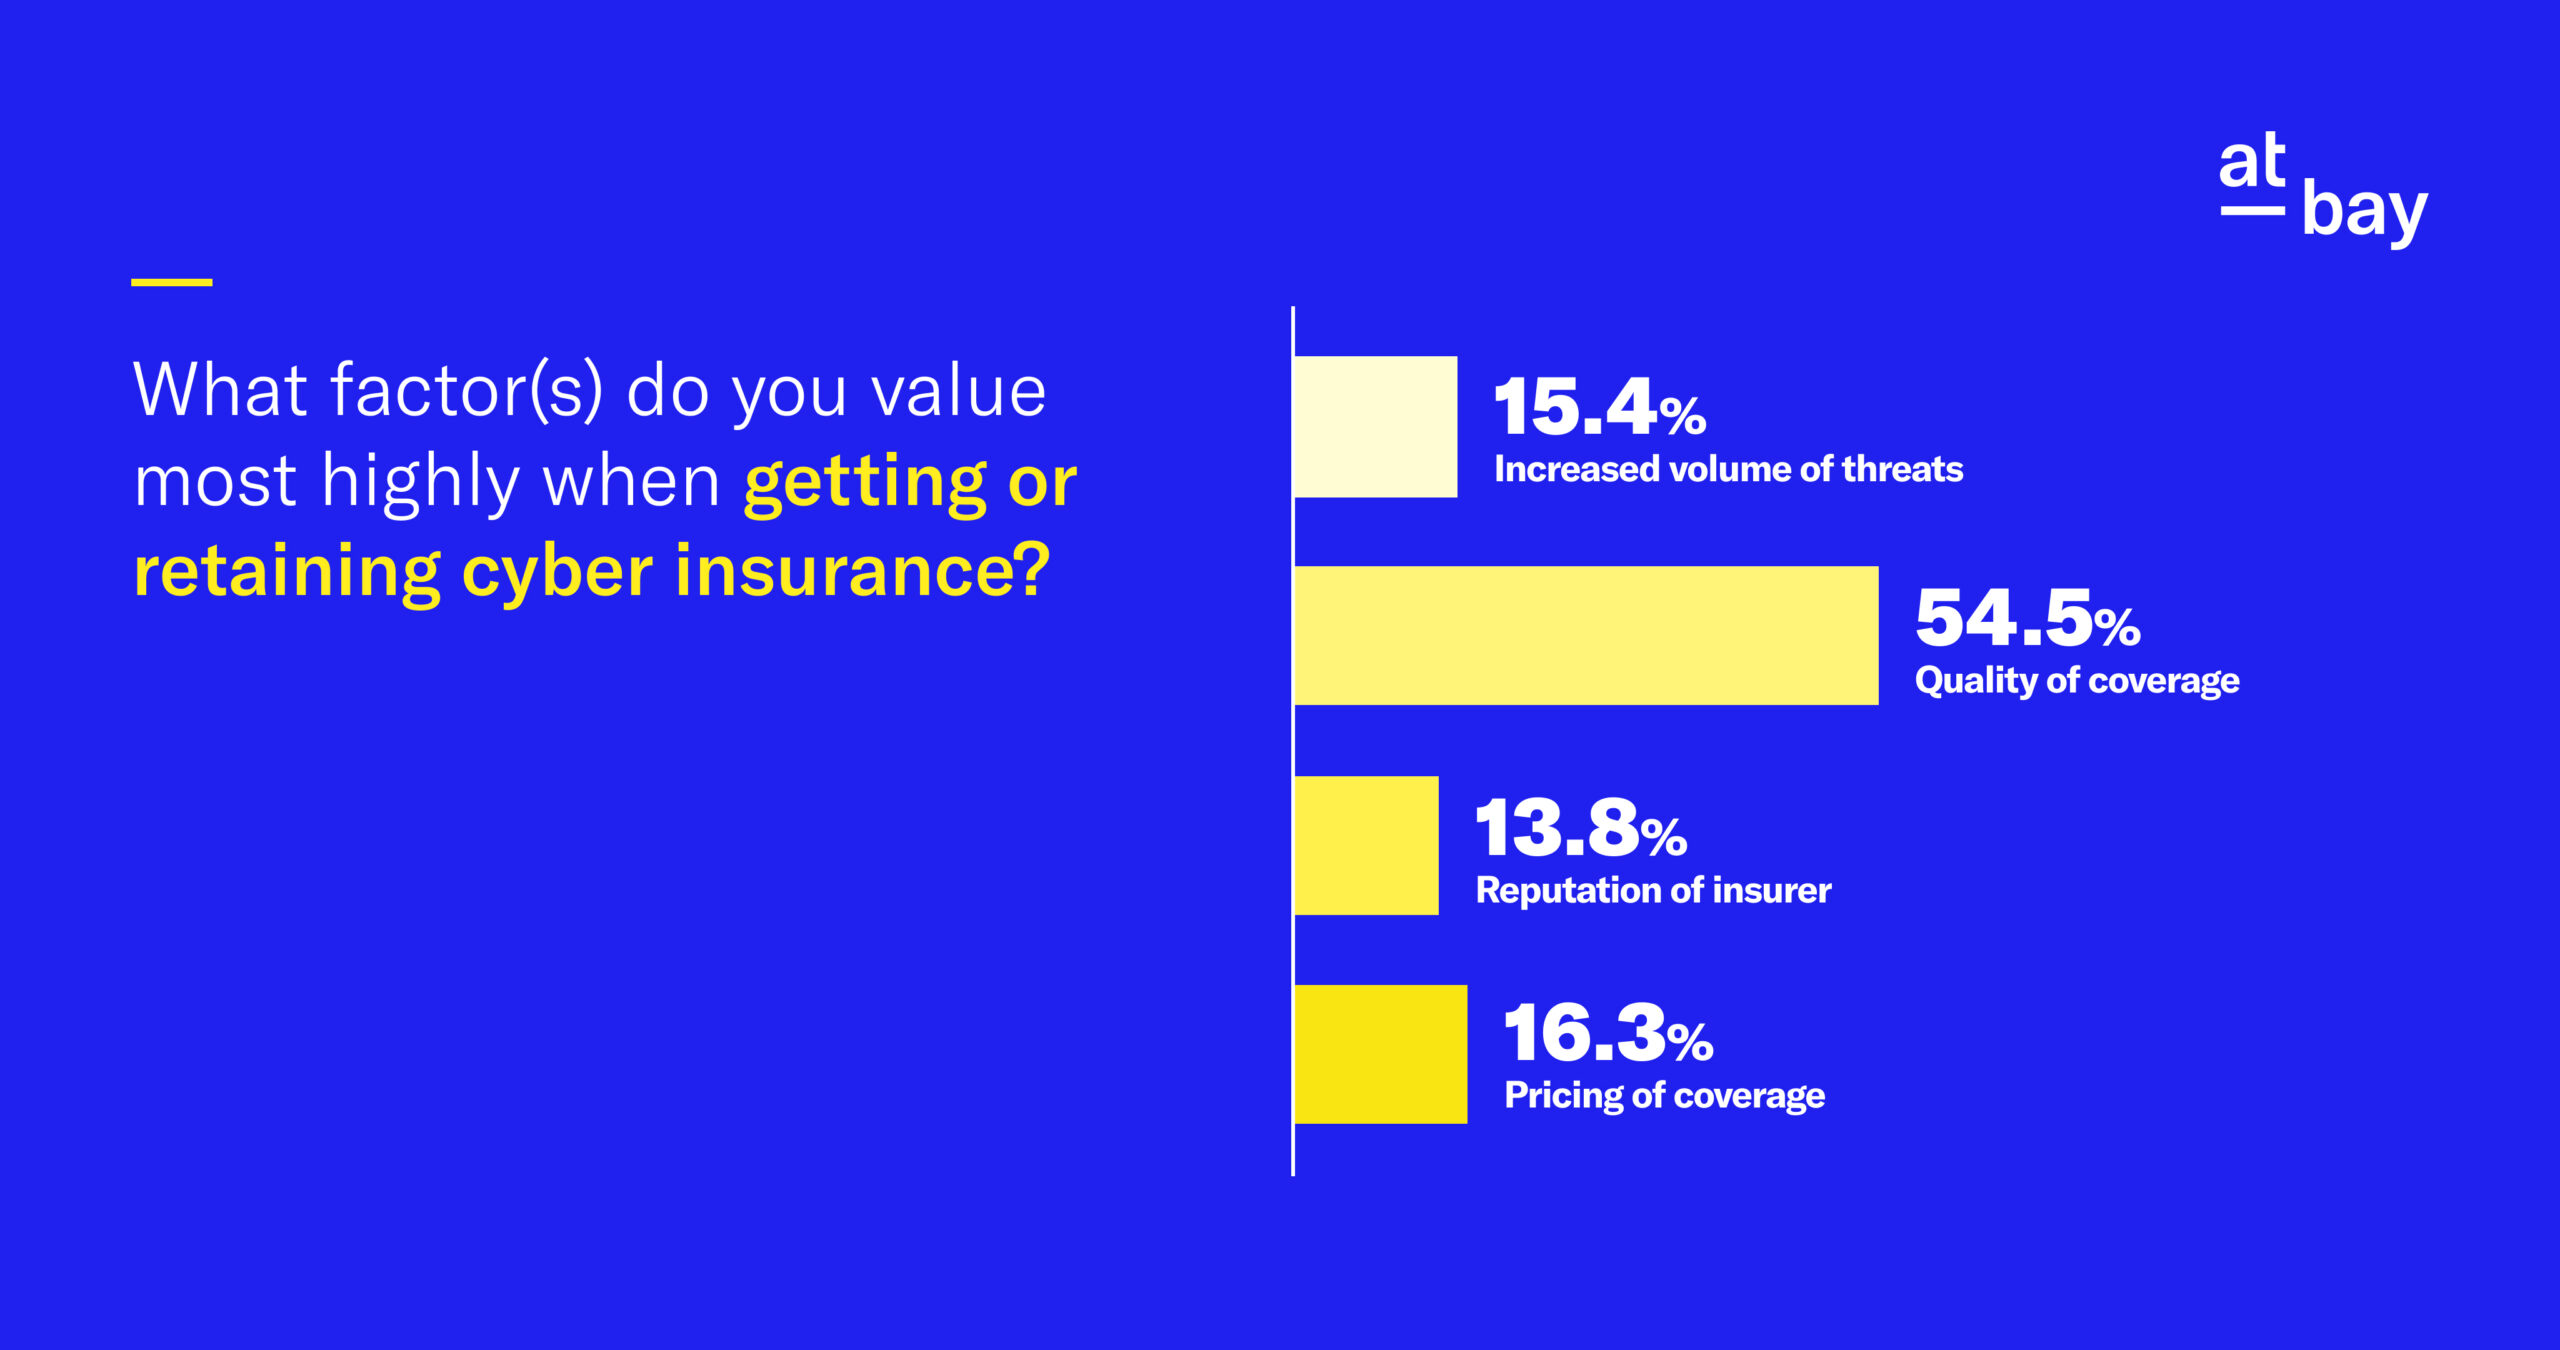 What Factor(s) Do You Value Most Highly When Getting or Retaining Cyber Insurance?